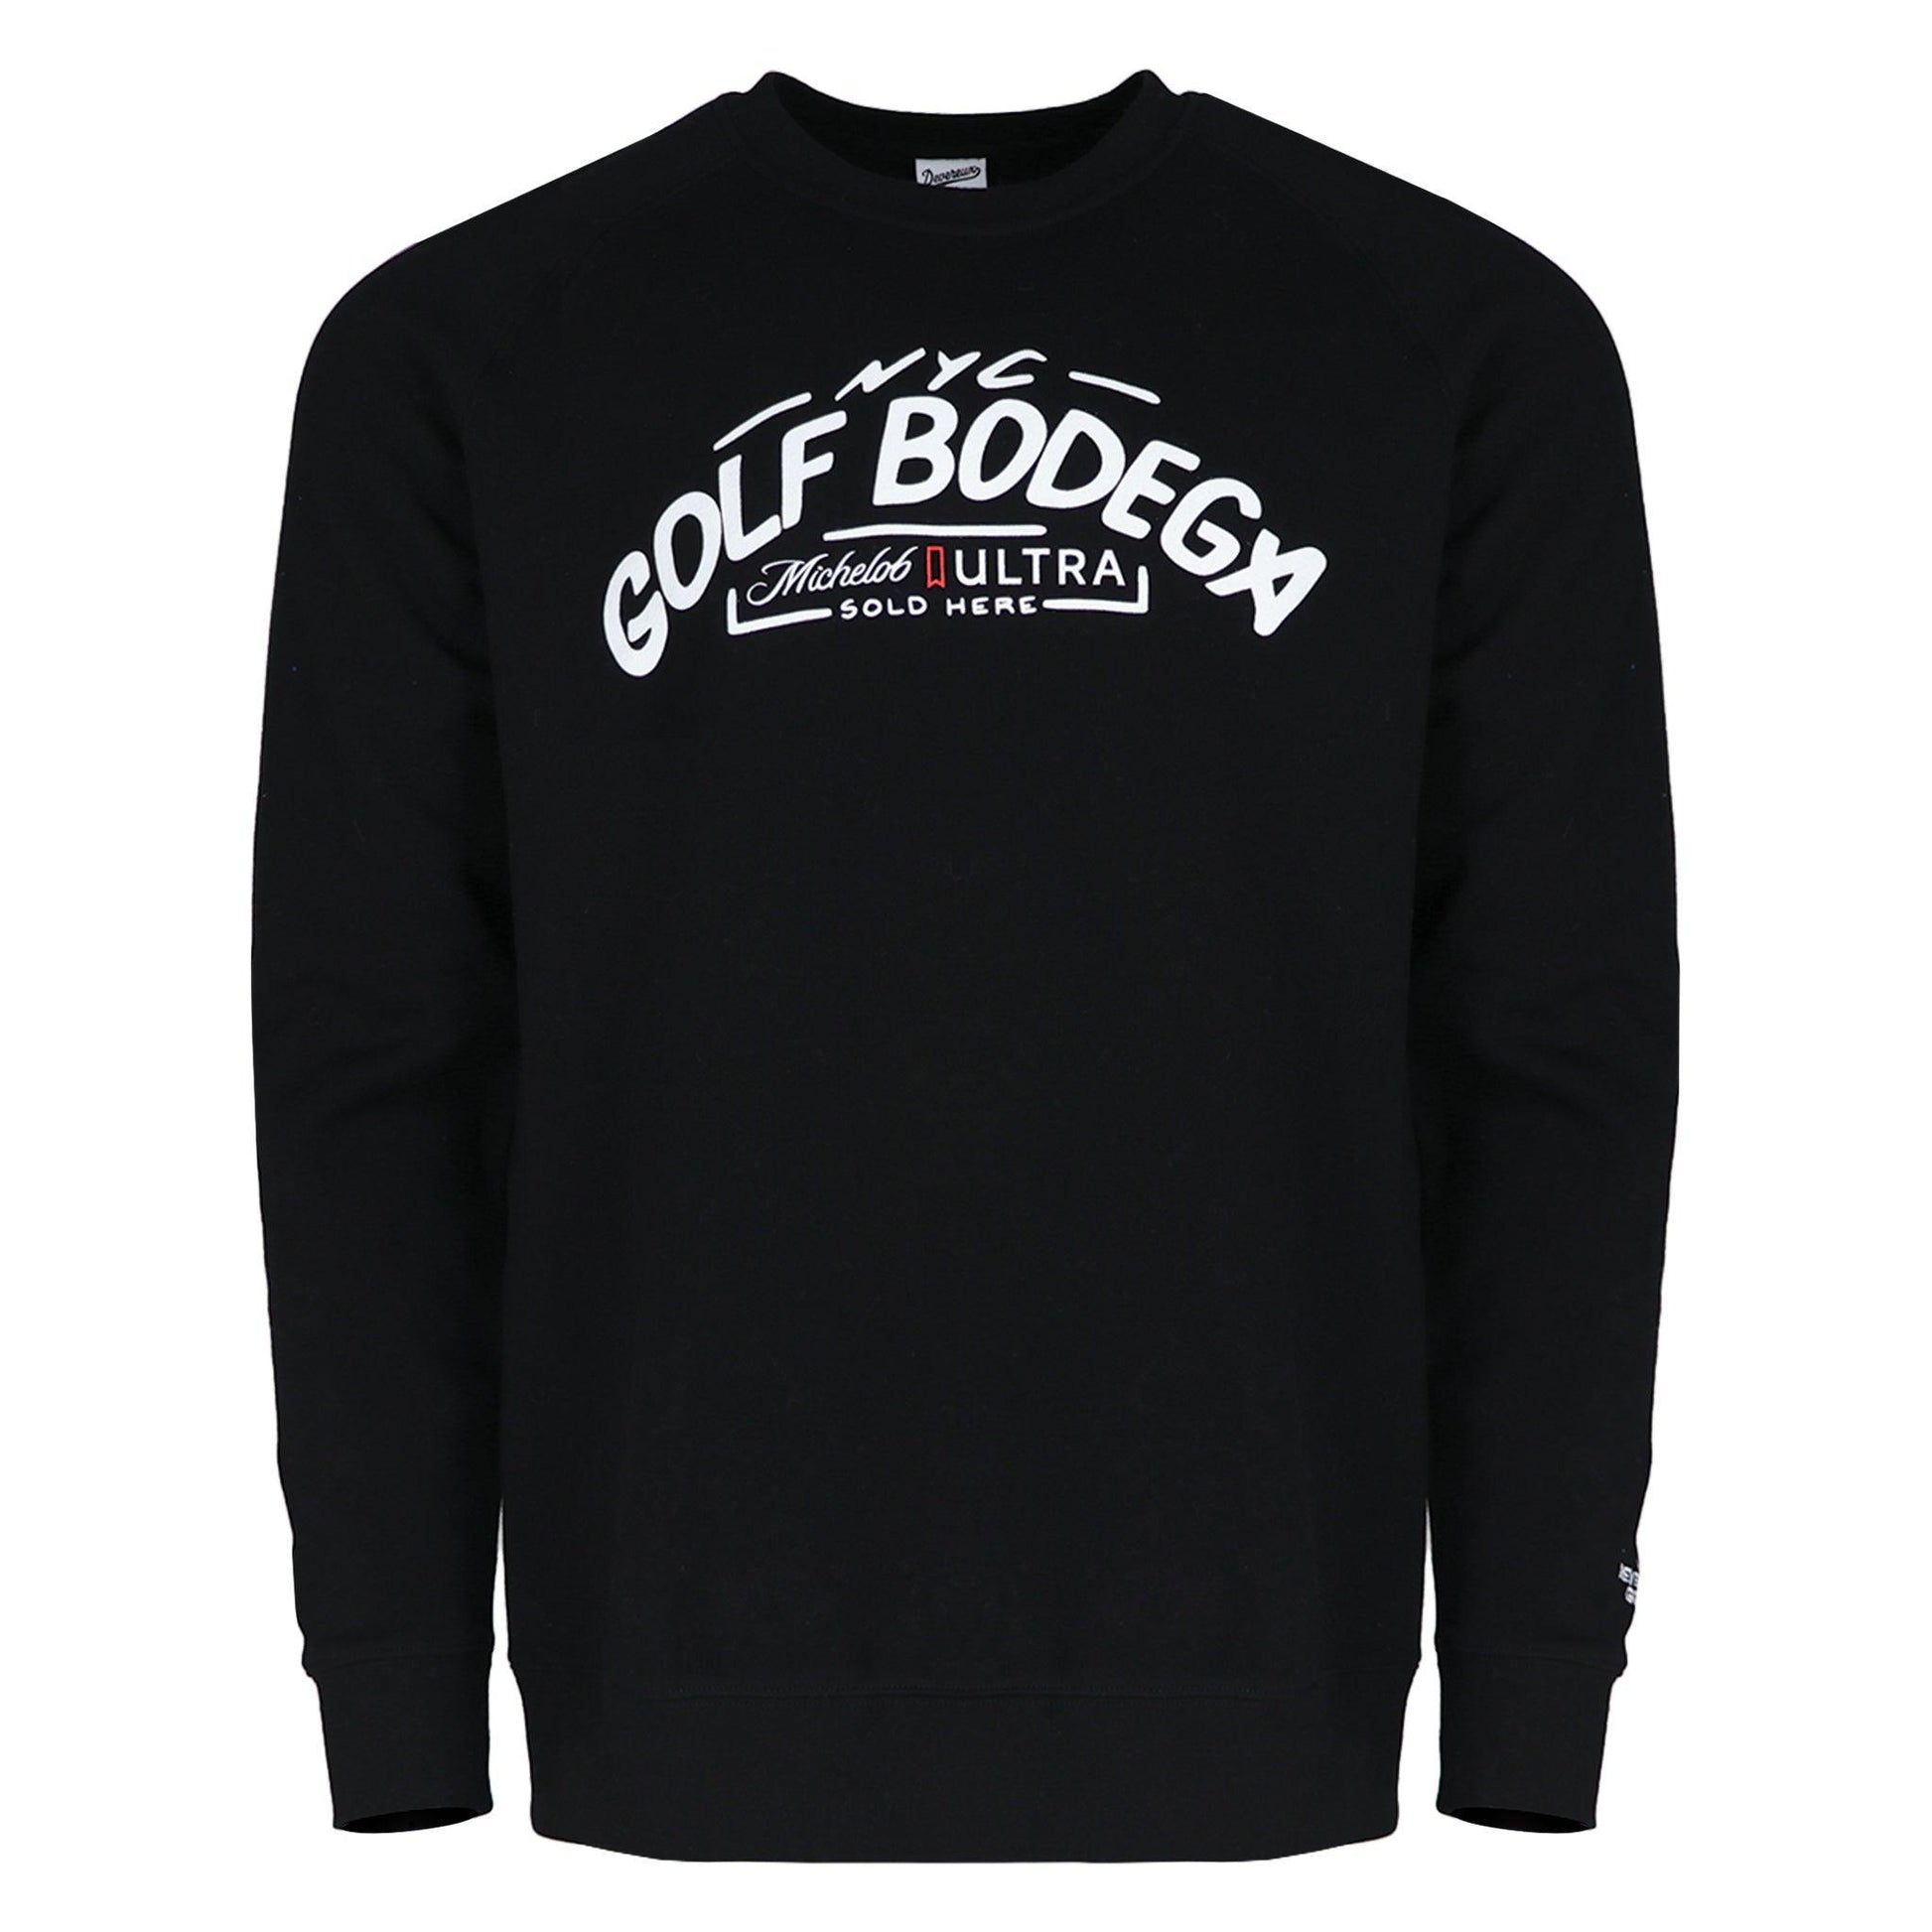 Black crewneck that reads NYC Golf Bodega Michelob ULTRA Sold Here on front full chest